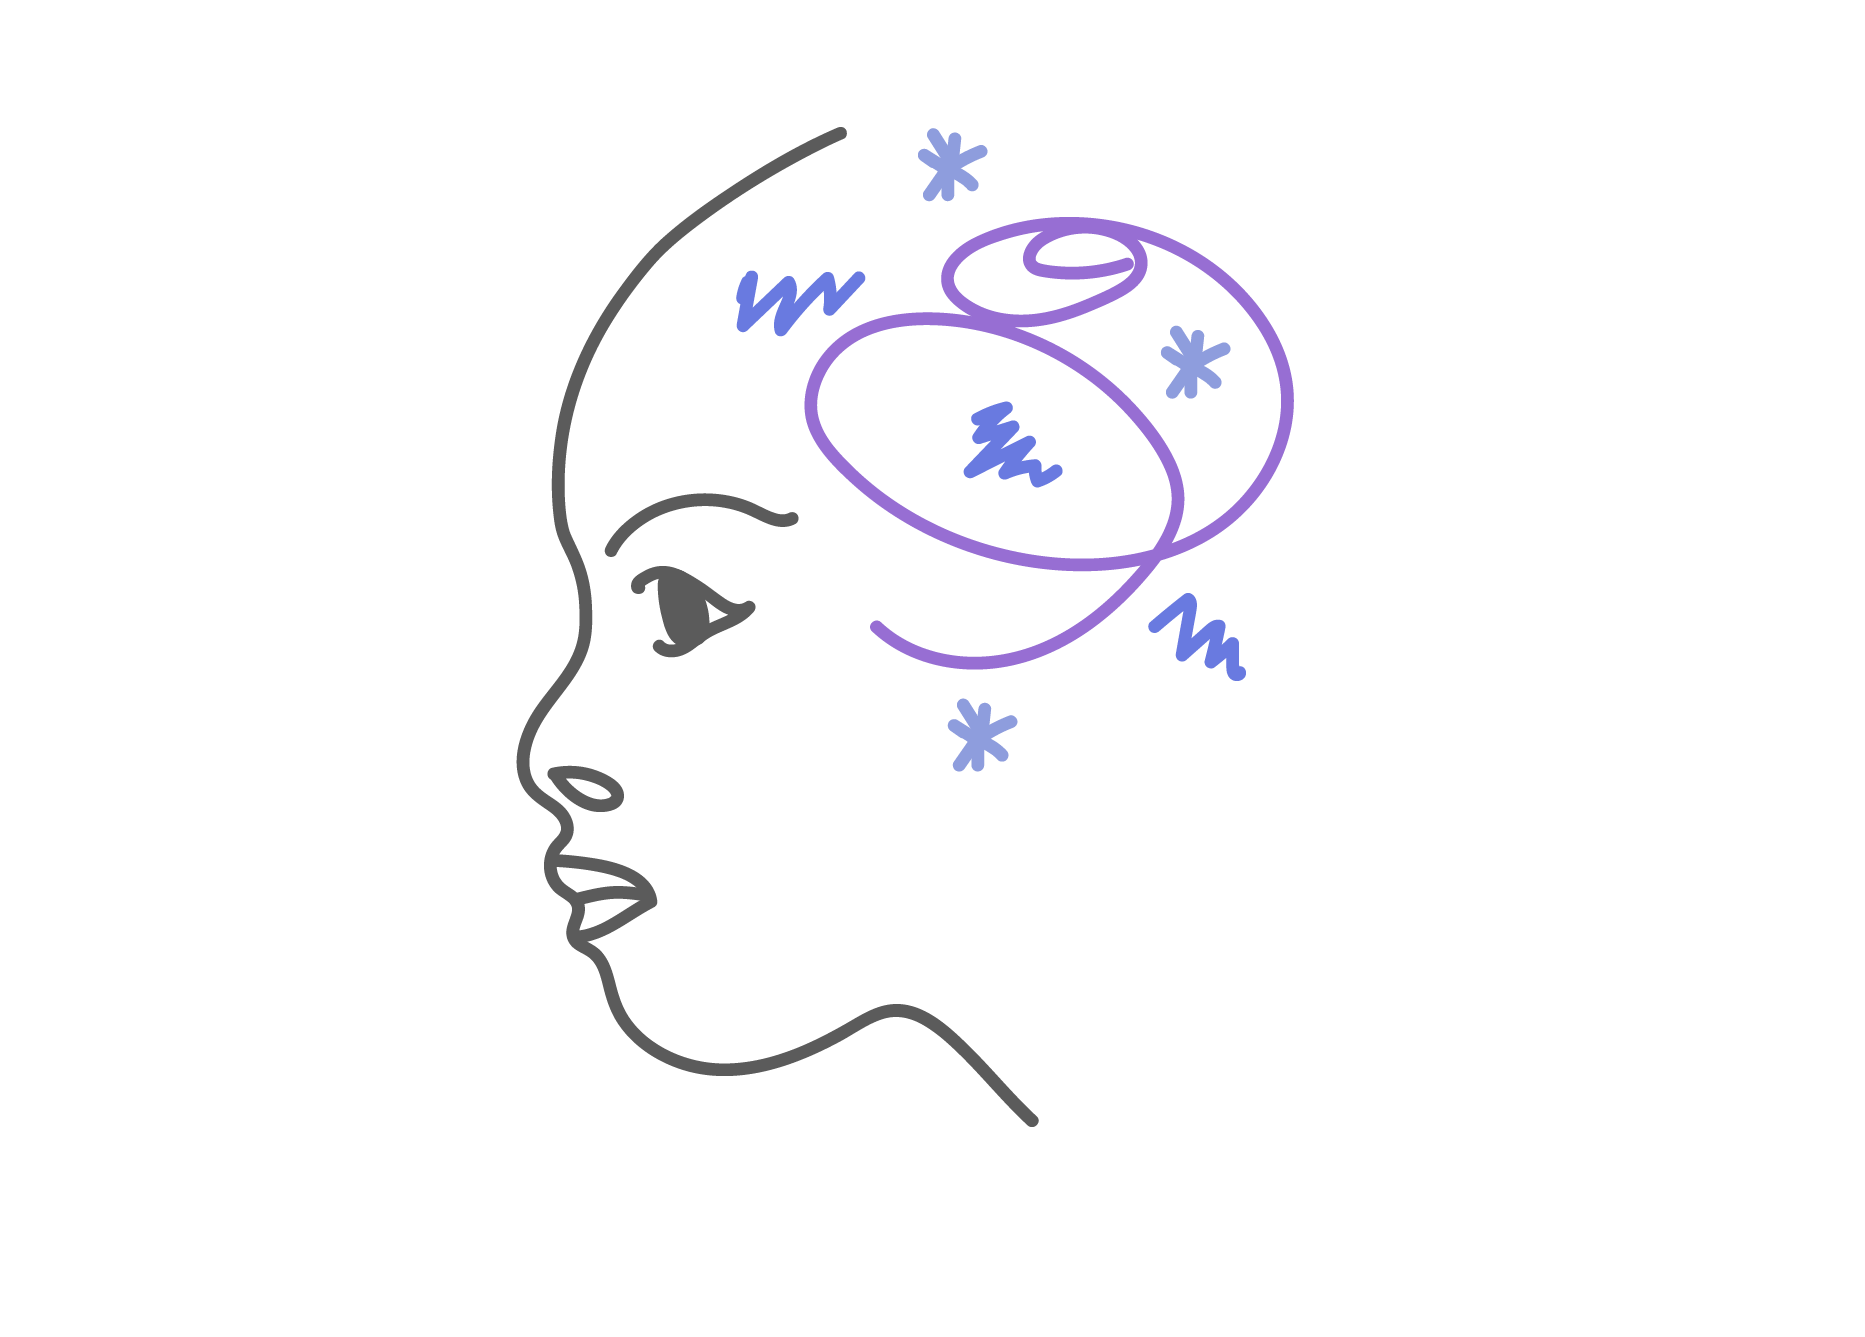 An illustration of a child's profile with blue and purple squiggles near head signifying mental health.